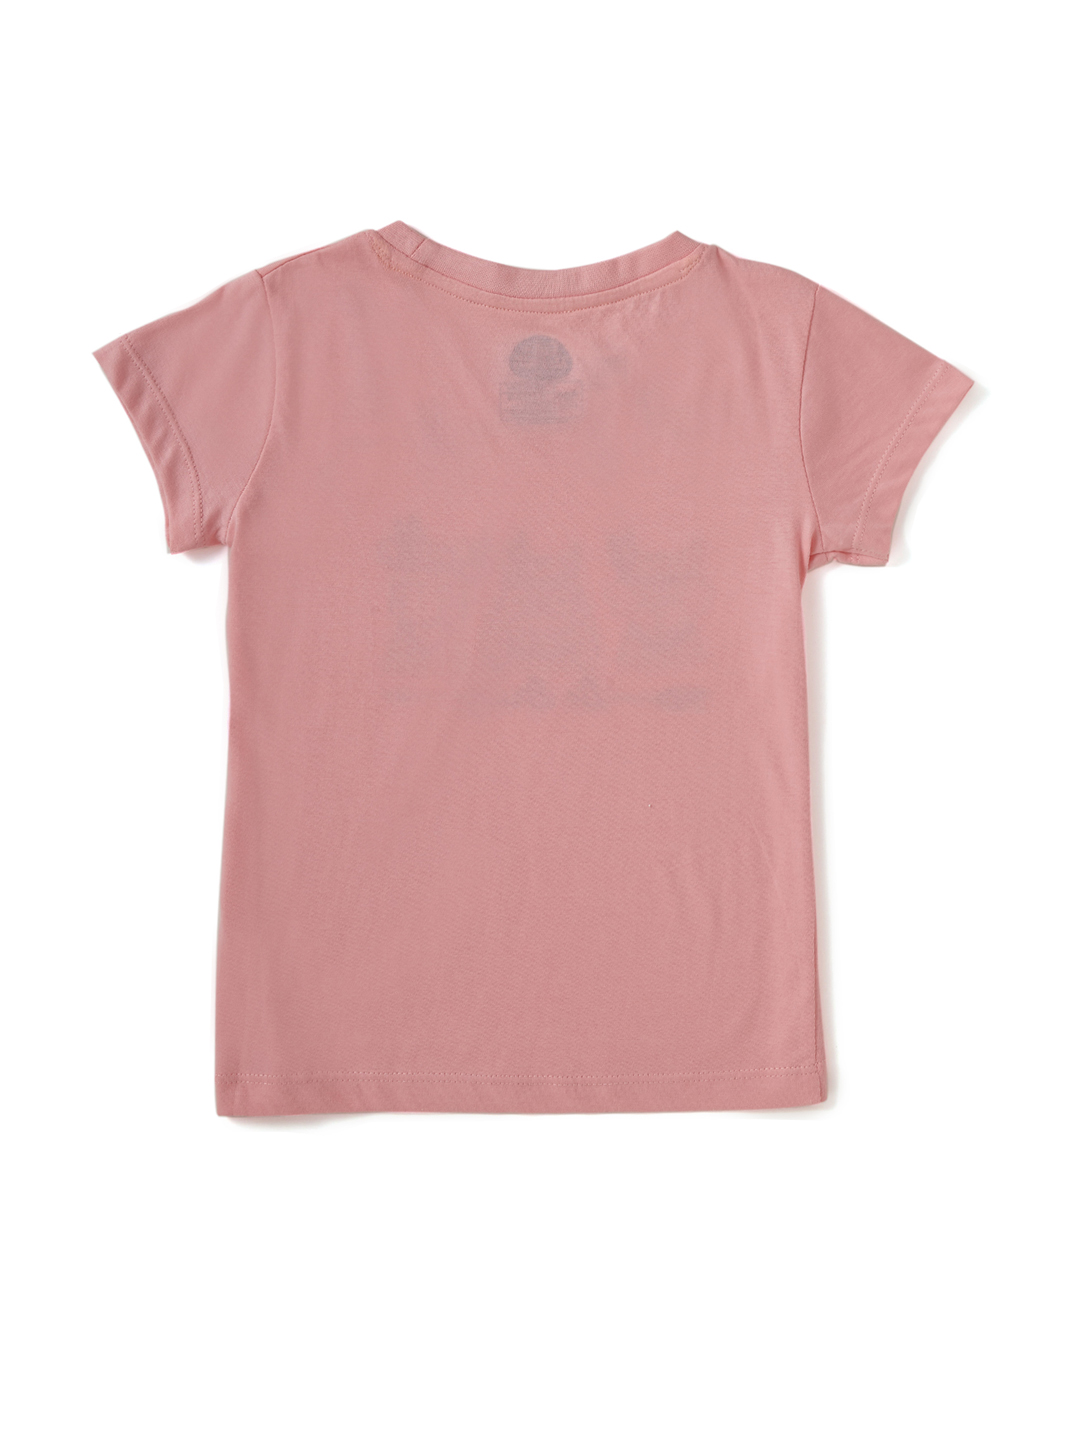 Buy Brilliant Basics - Girls Pack of 2 T-Shirts, 4 to 8 Years (Pink,Orange) Online in India at 